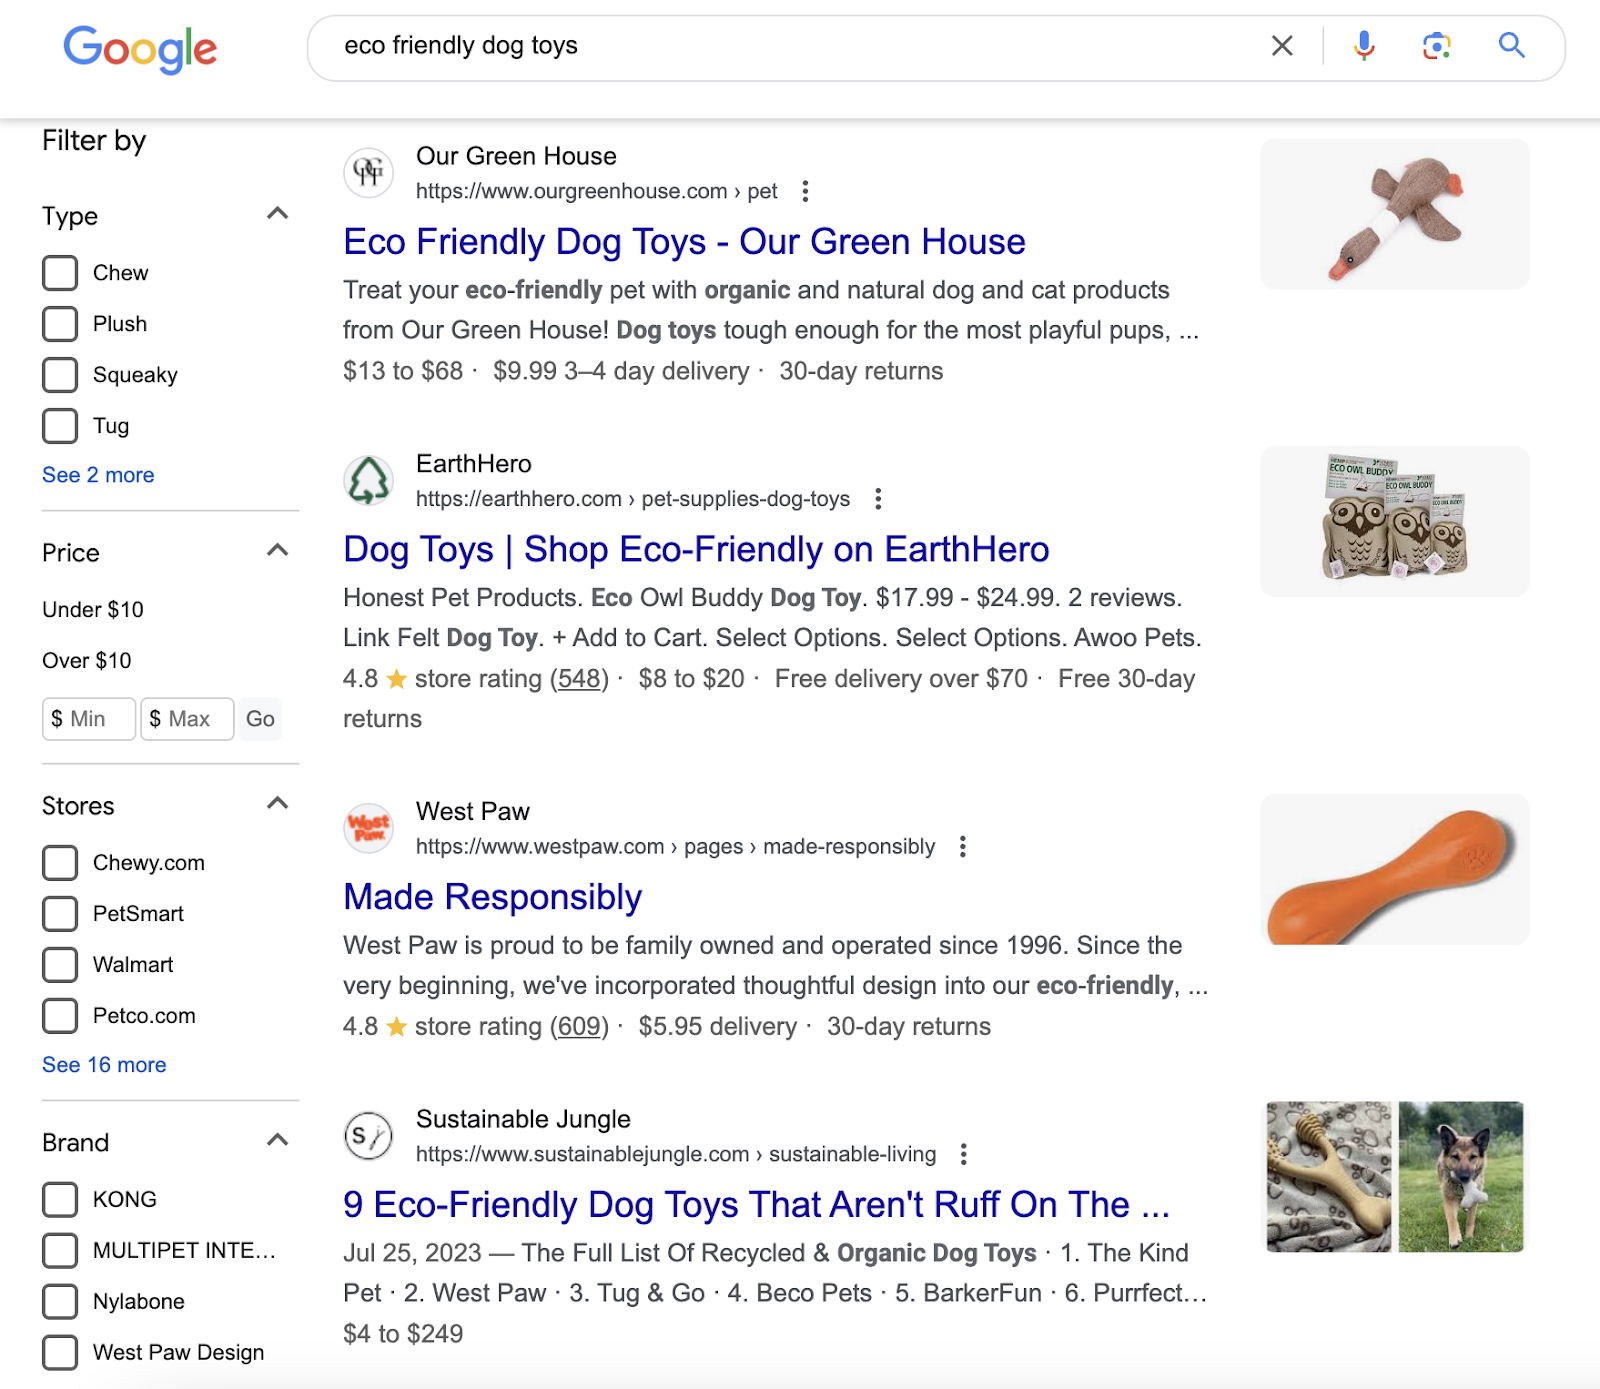 Google search results for “eco friendly dog toys.”